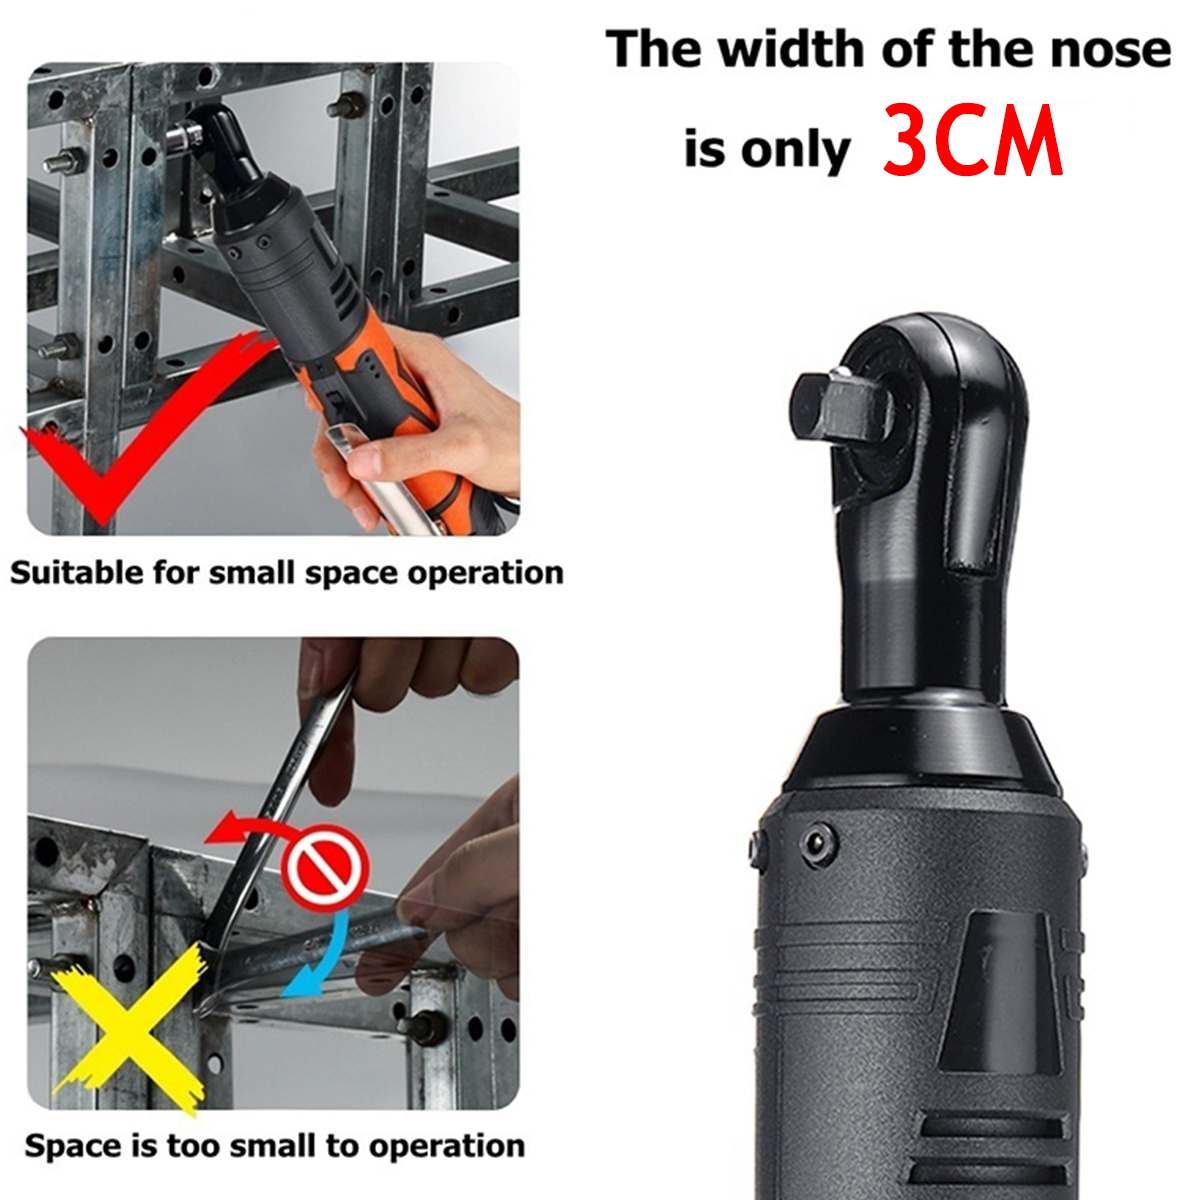 Efficient 42V Electric Wrench Angle Drill Screwdriver 3/8 Cordless Ratchet Wrench Scaffolding 100NM With 1/2 Lithium-Ion Battery